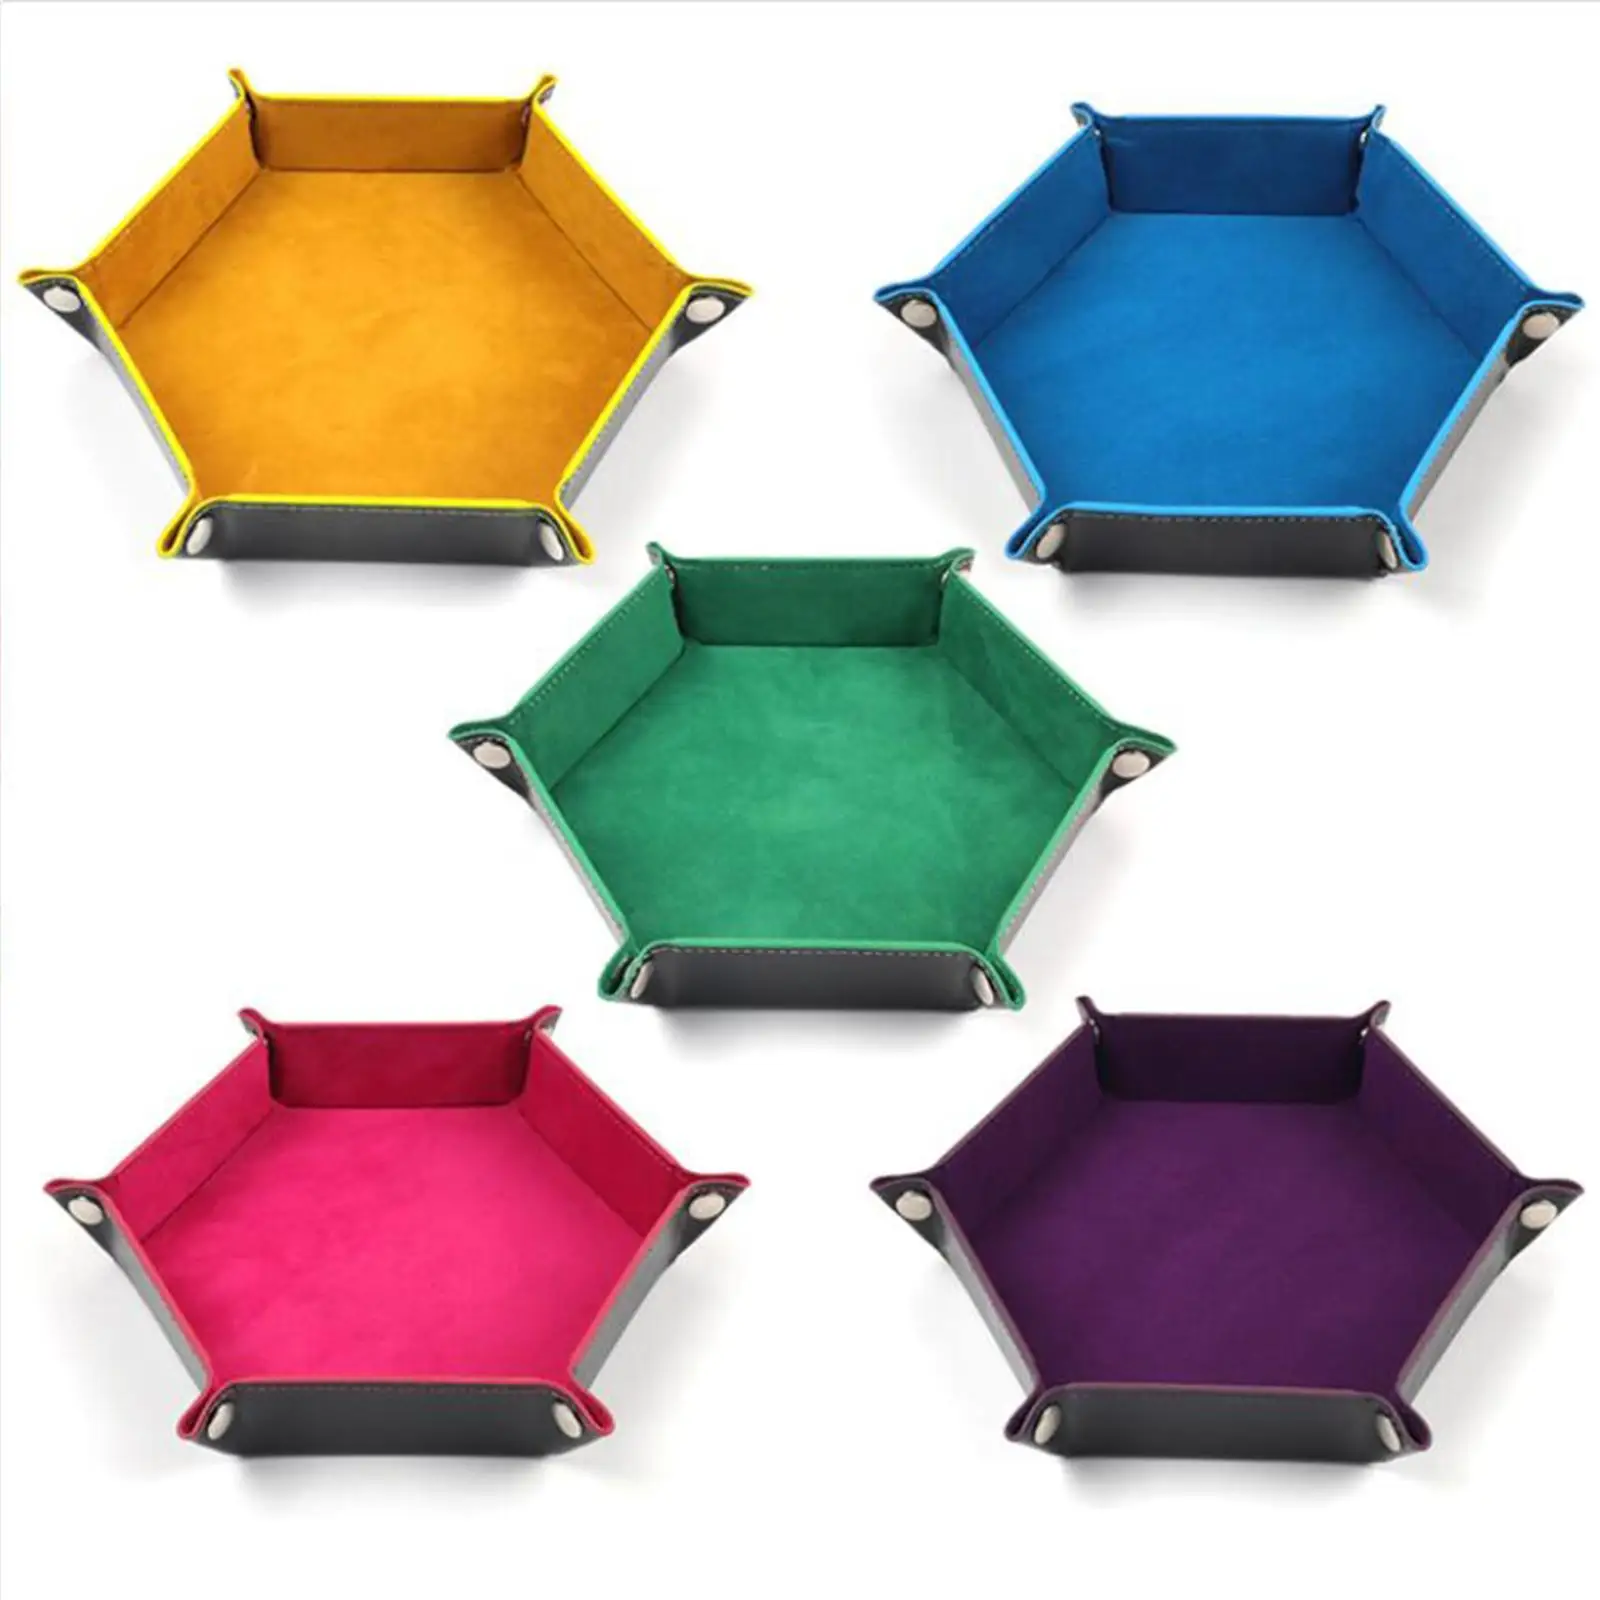  Foldable Dice Tray Holder PU Leather Velvet for Table Games Candies Earbuds Table Board Roleplaying Game Dice Holder Box 